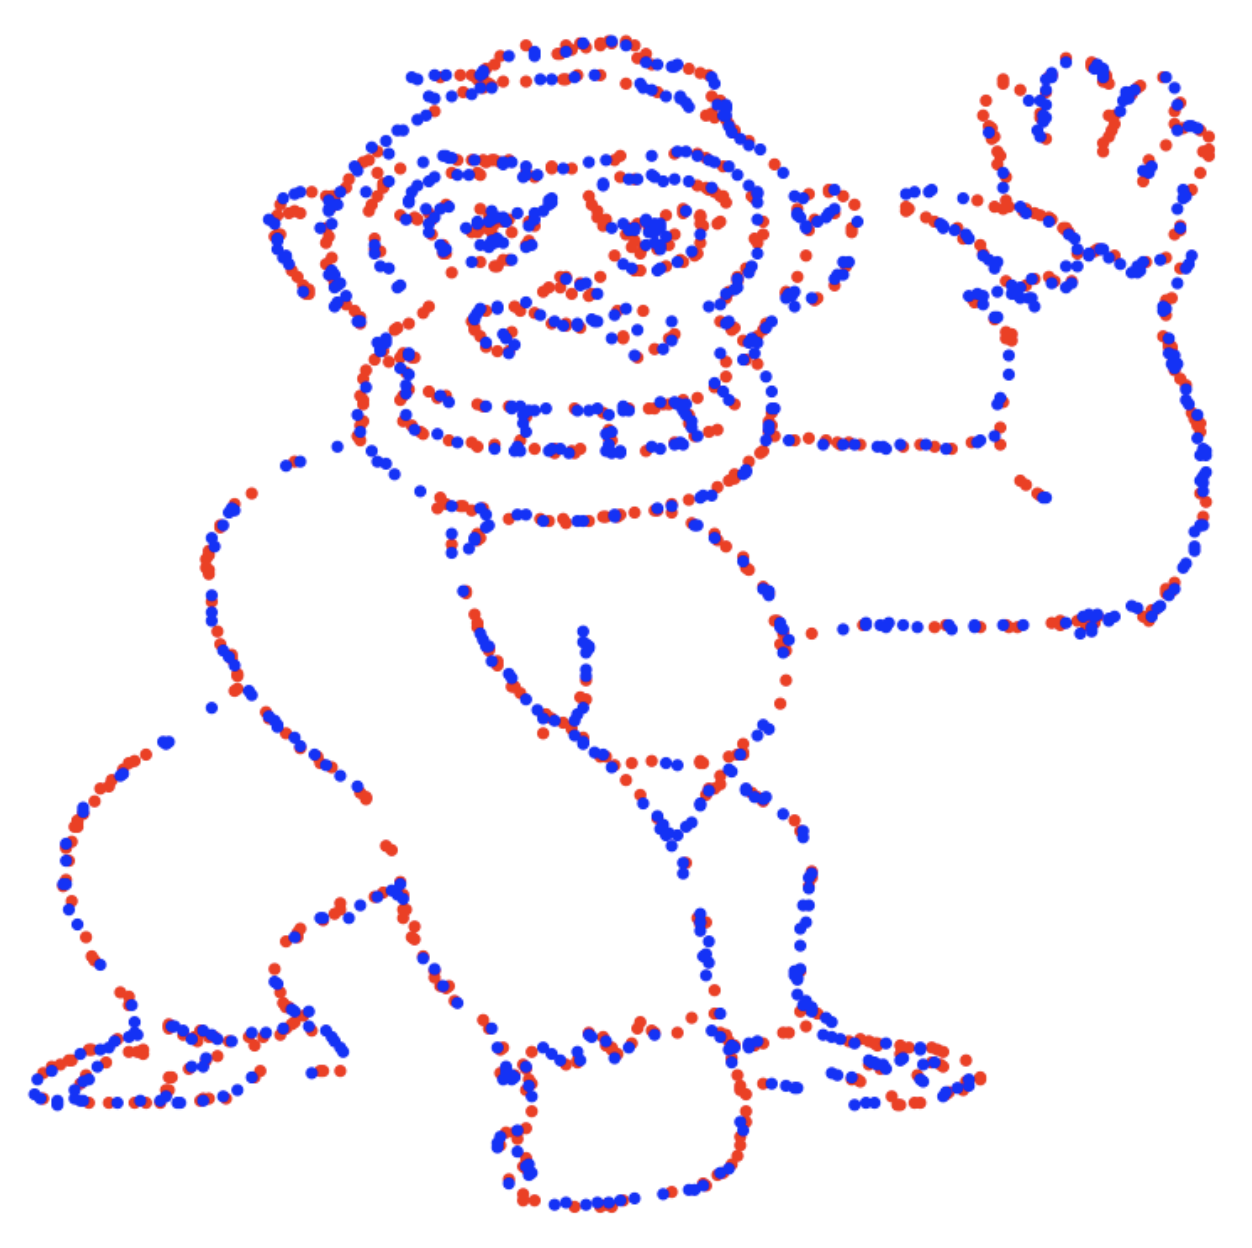 A picture of a cartoon gorilla whose outline is composed of red and blue dots.